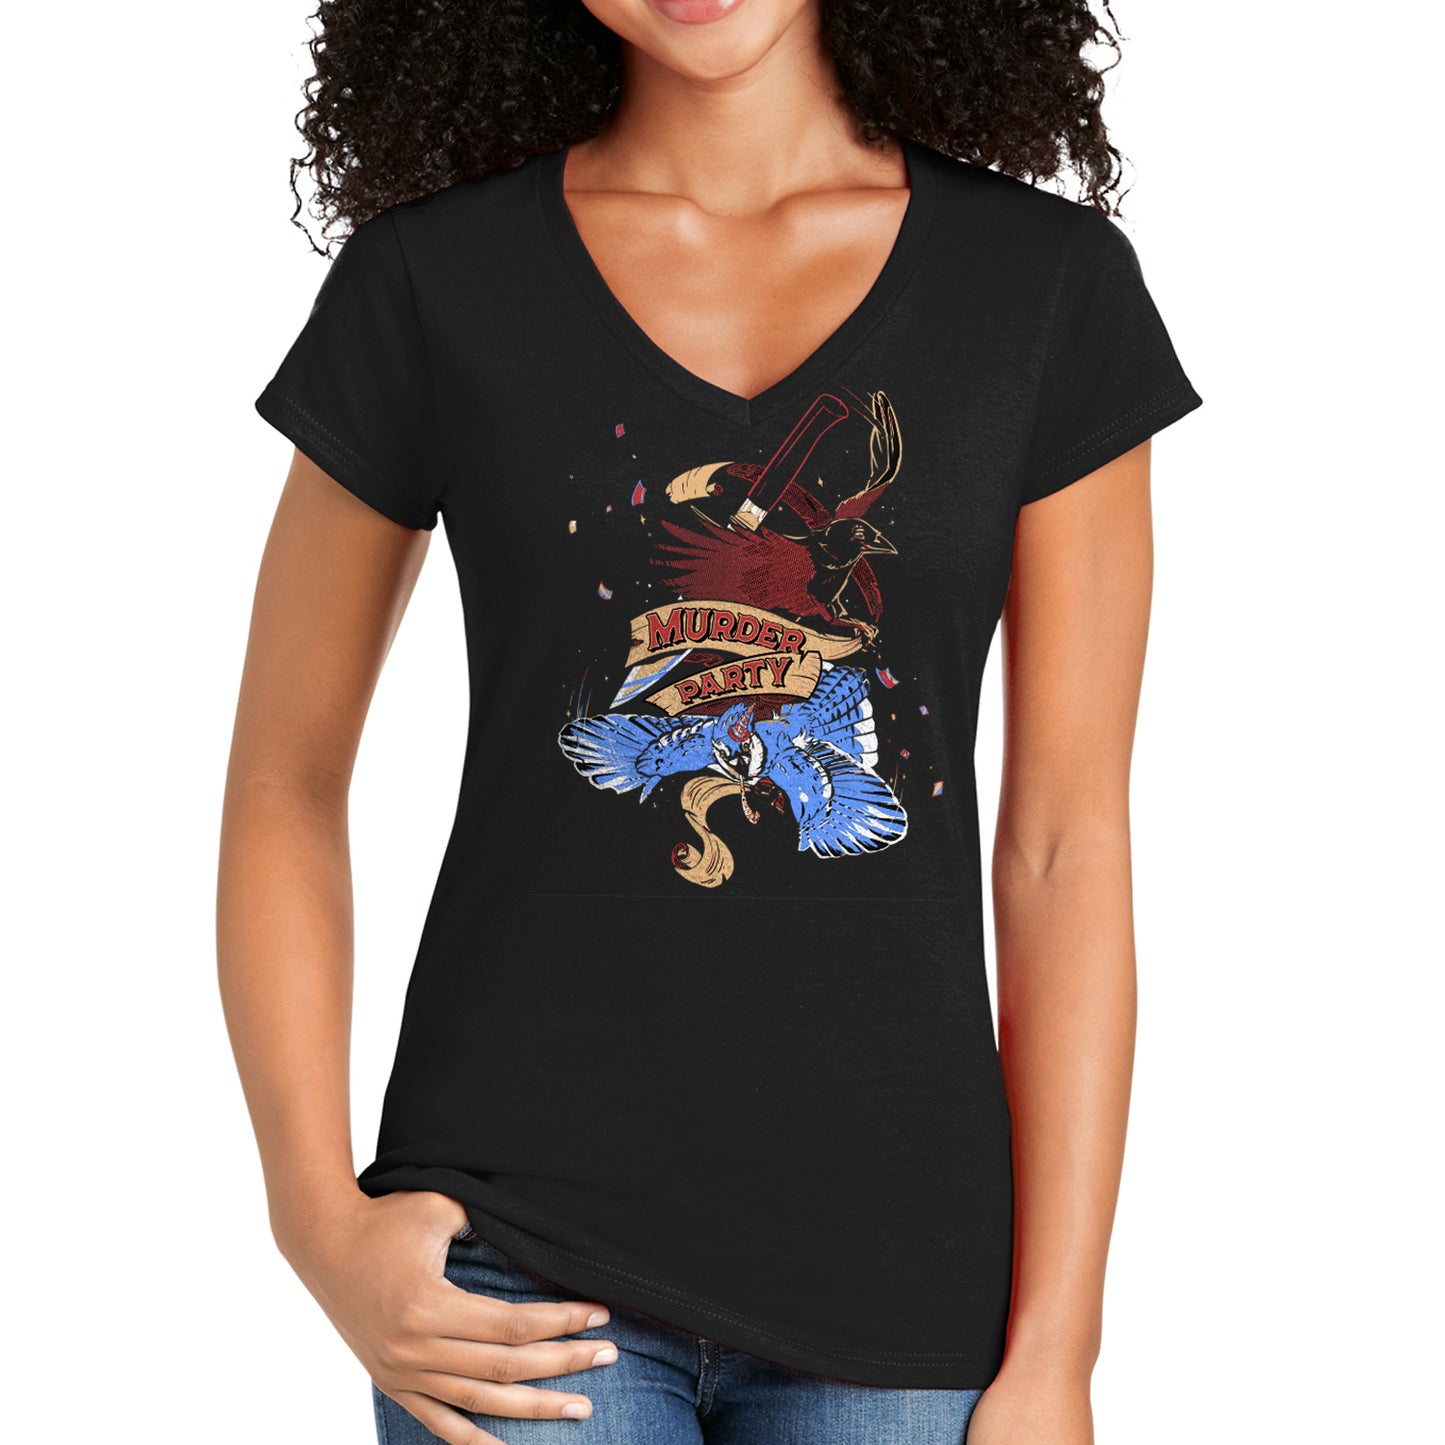 An image of a female model wearing a black T-shirt with a drawing of two crows on the front, one in red, the other in blue. At the center in red text is "murder party."